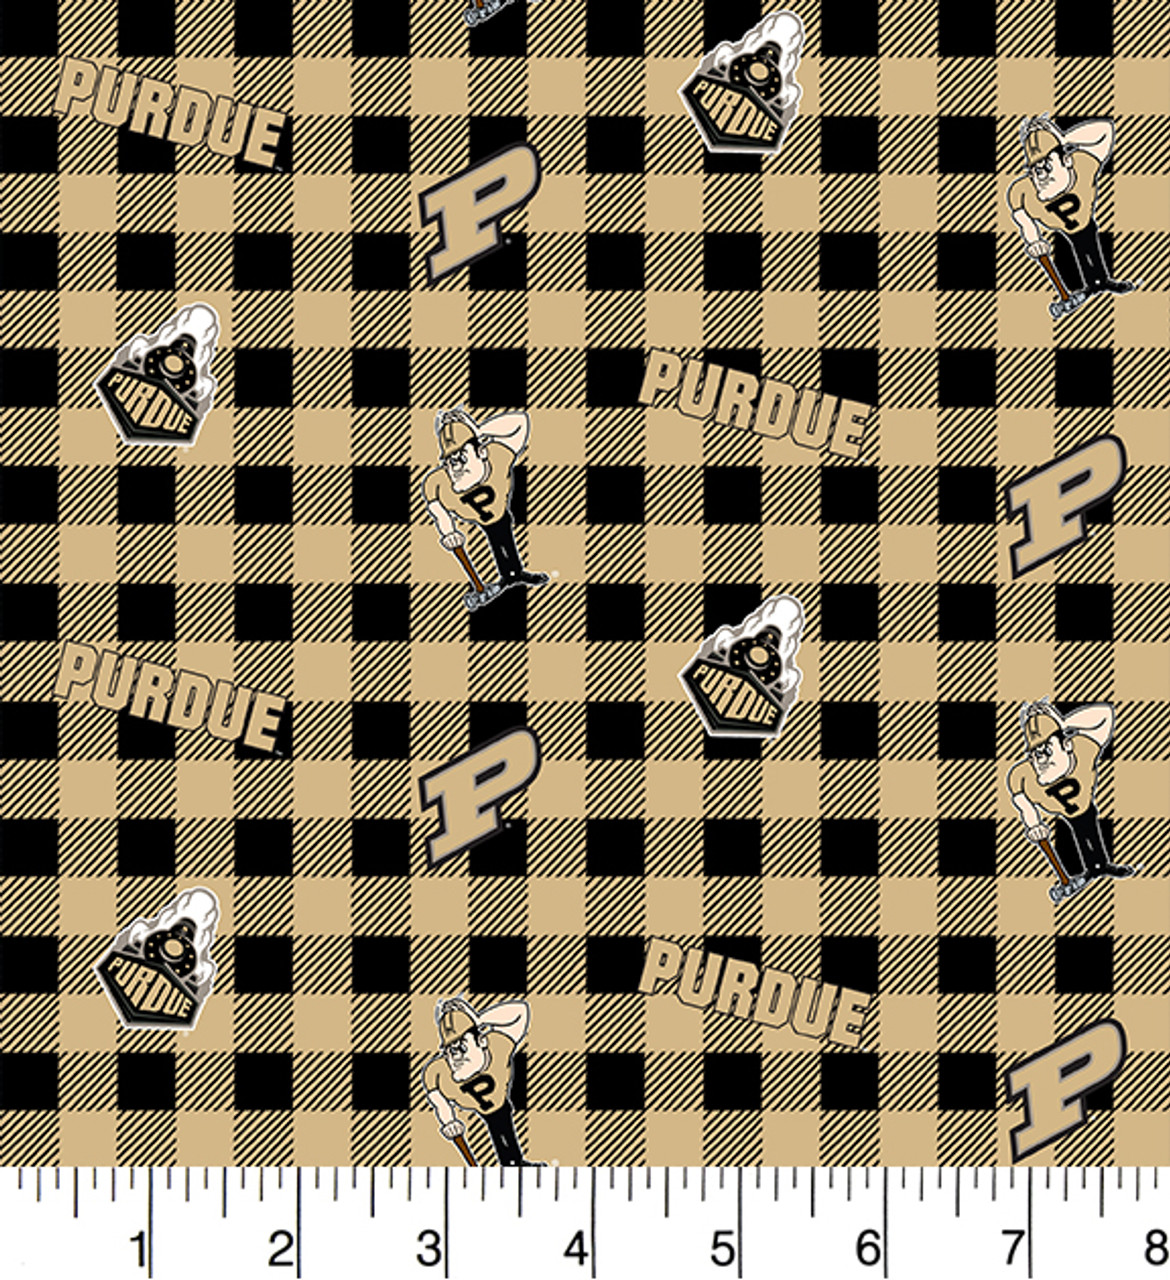 Purdue University Boilermakers Cotton Fabric with Buffalo Plaid Print or Matching Solid Cotton Fabrics